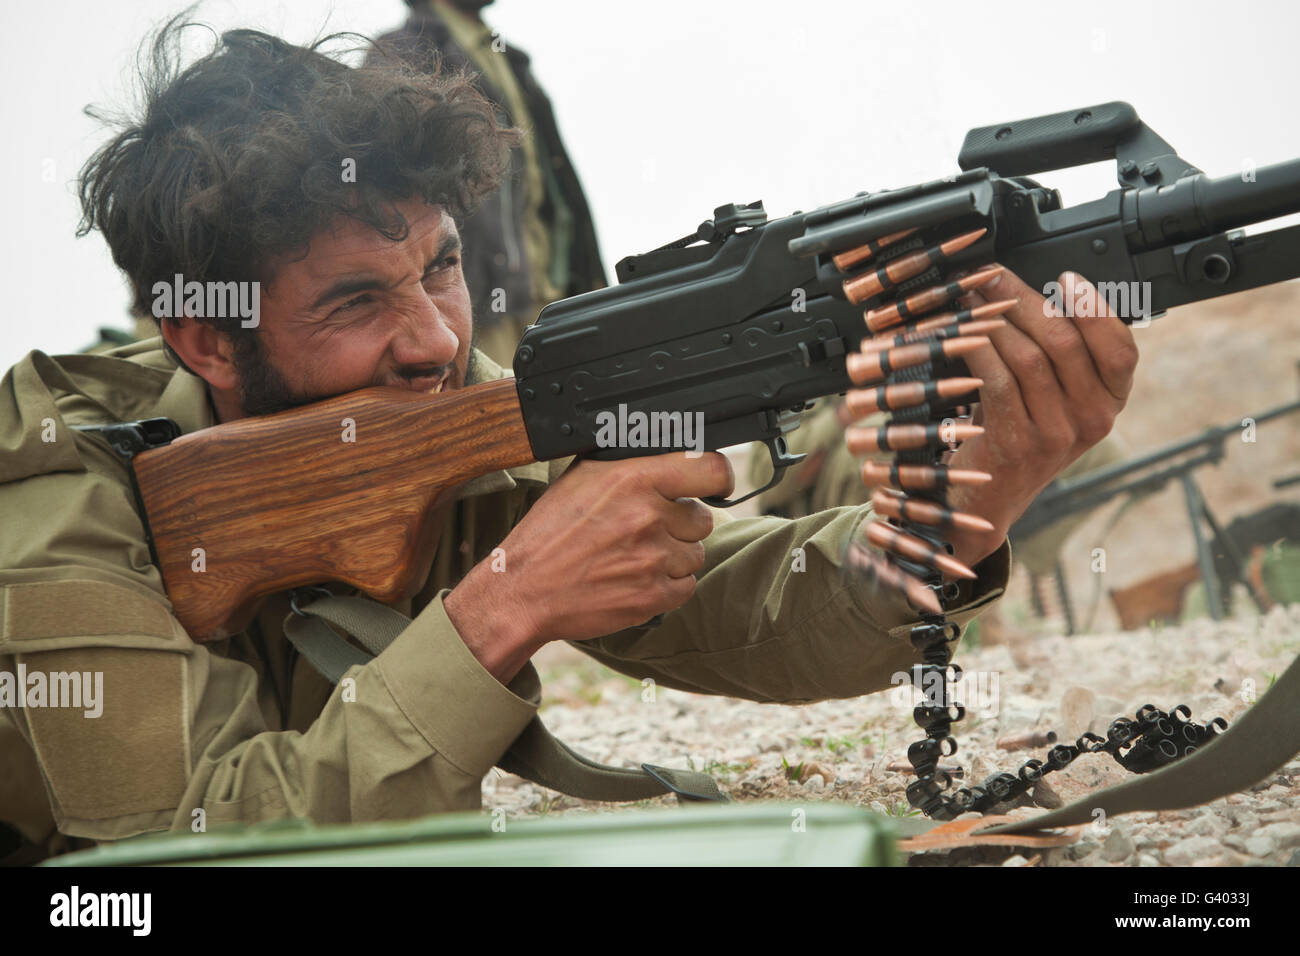 An Afghan Local Police officer fires a machine gun during live-fire training. Stock Photo